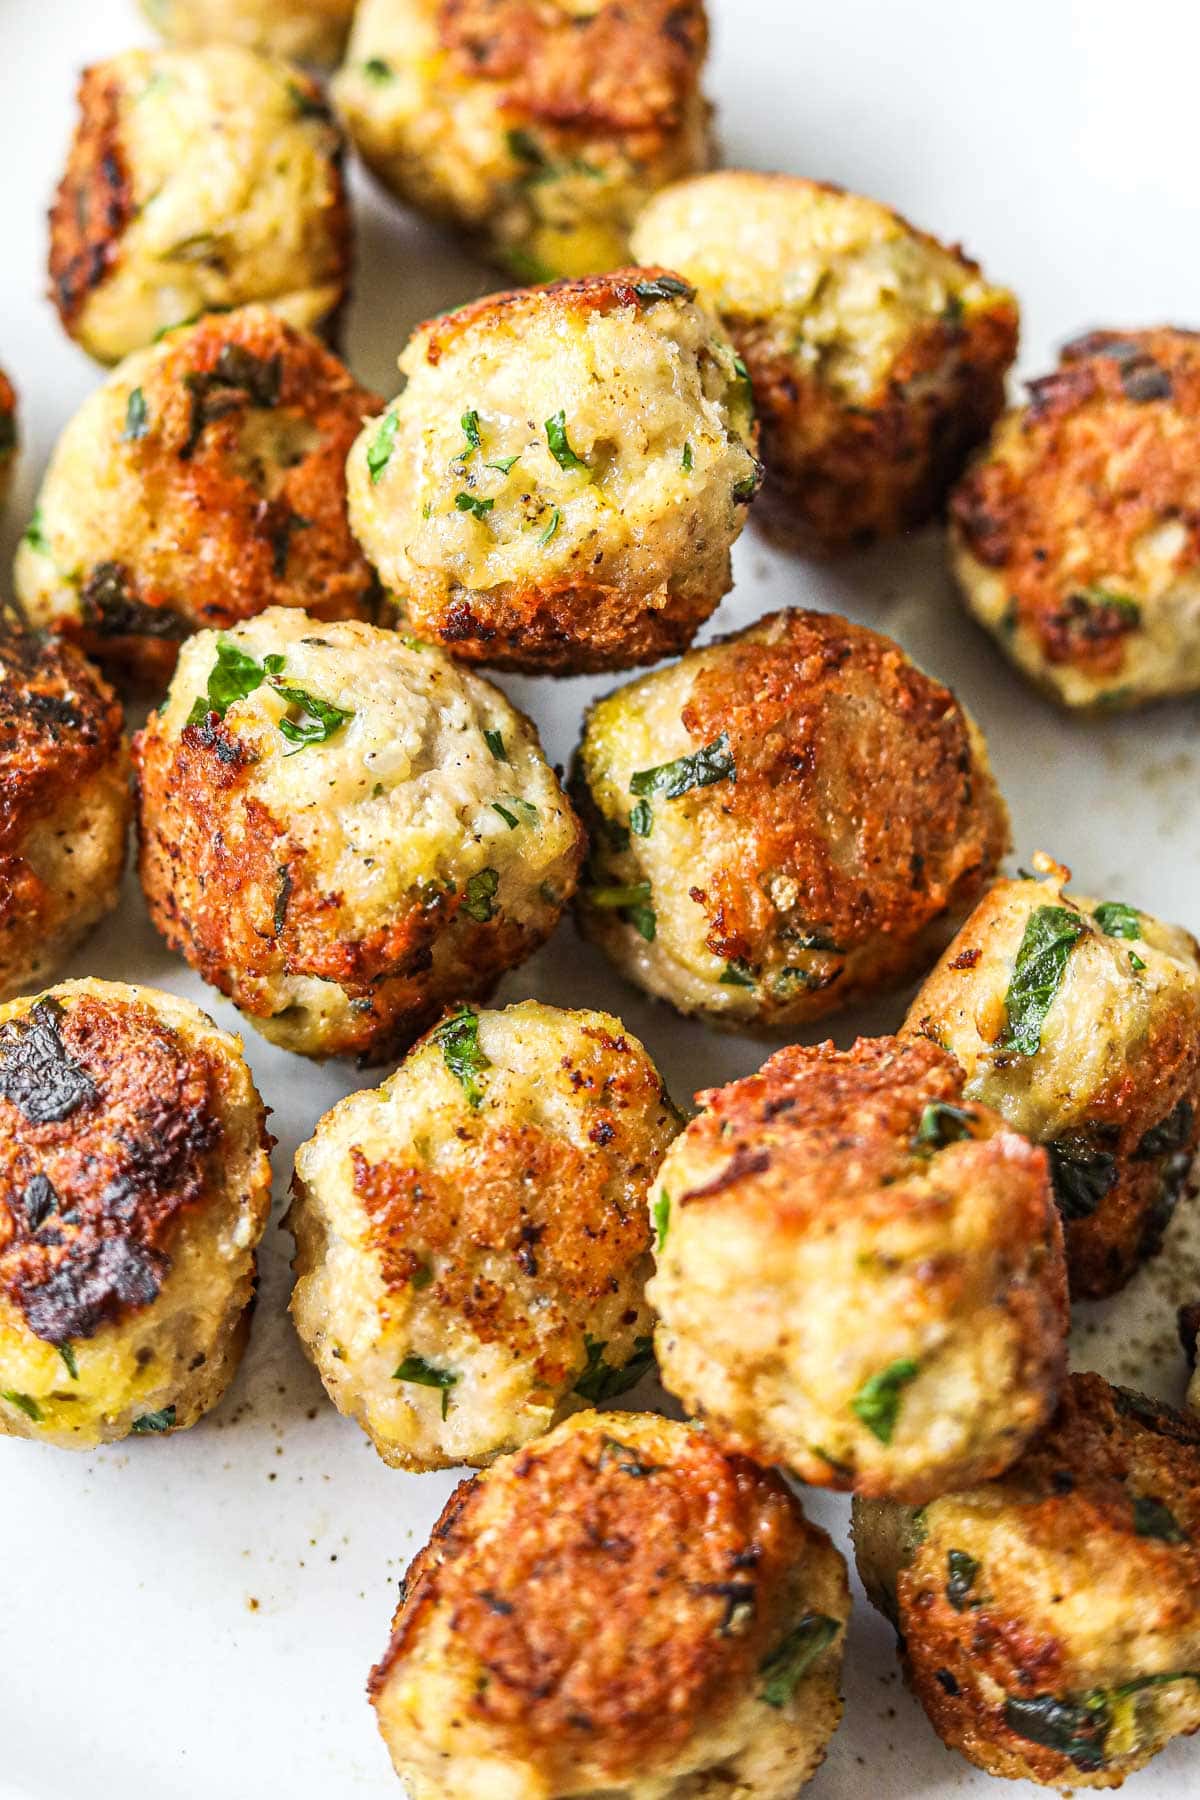 Baked or pan-friend healthy turkey meatballs in a pile on a plate.